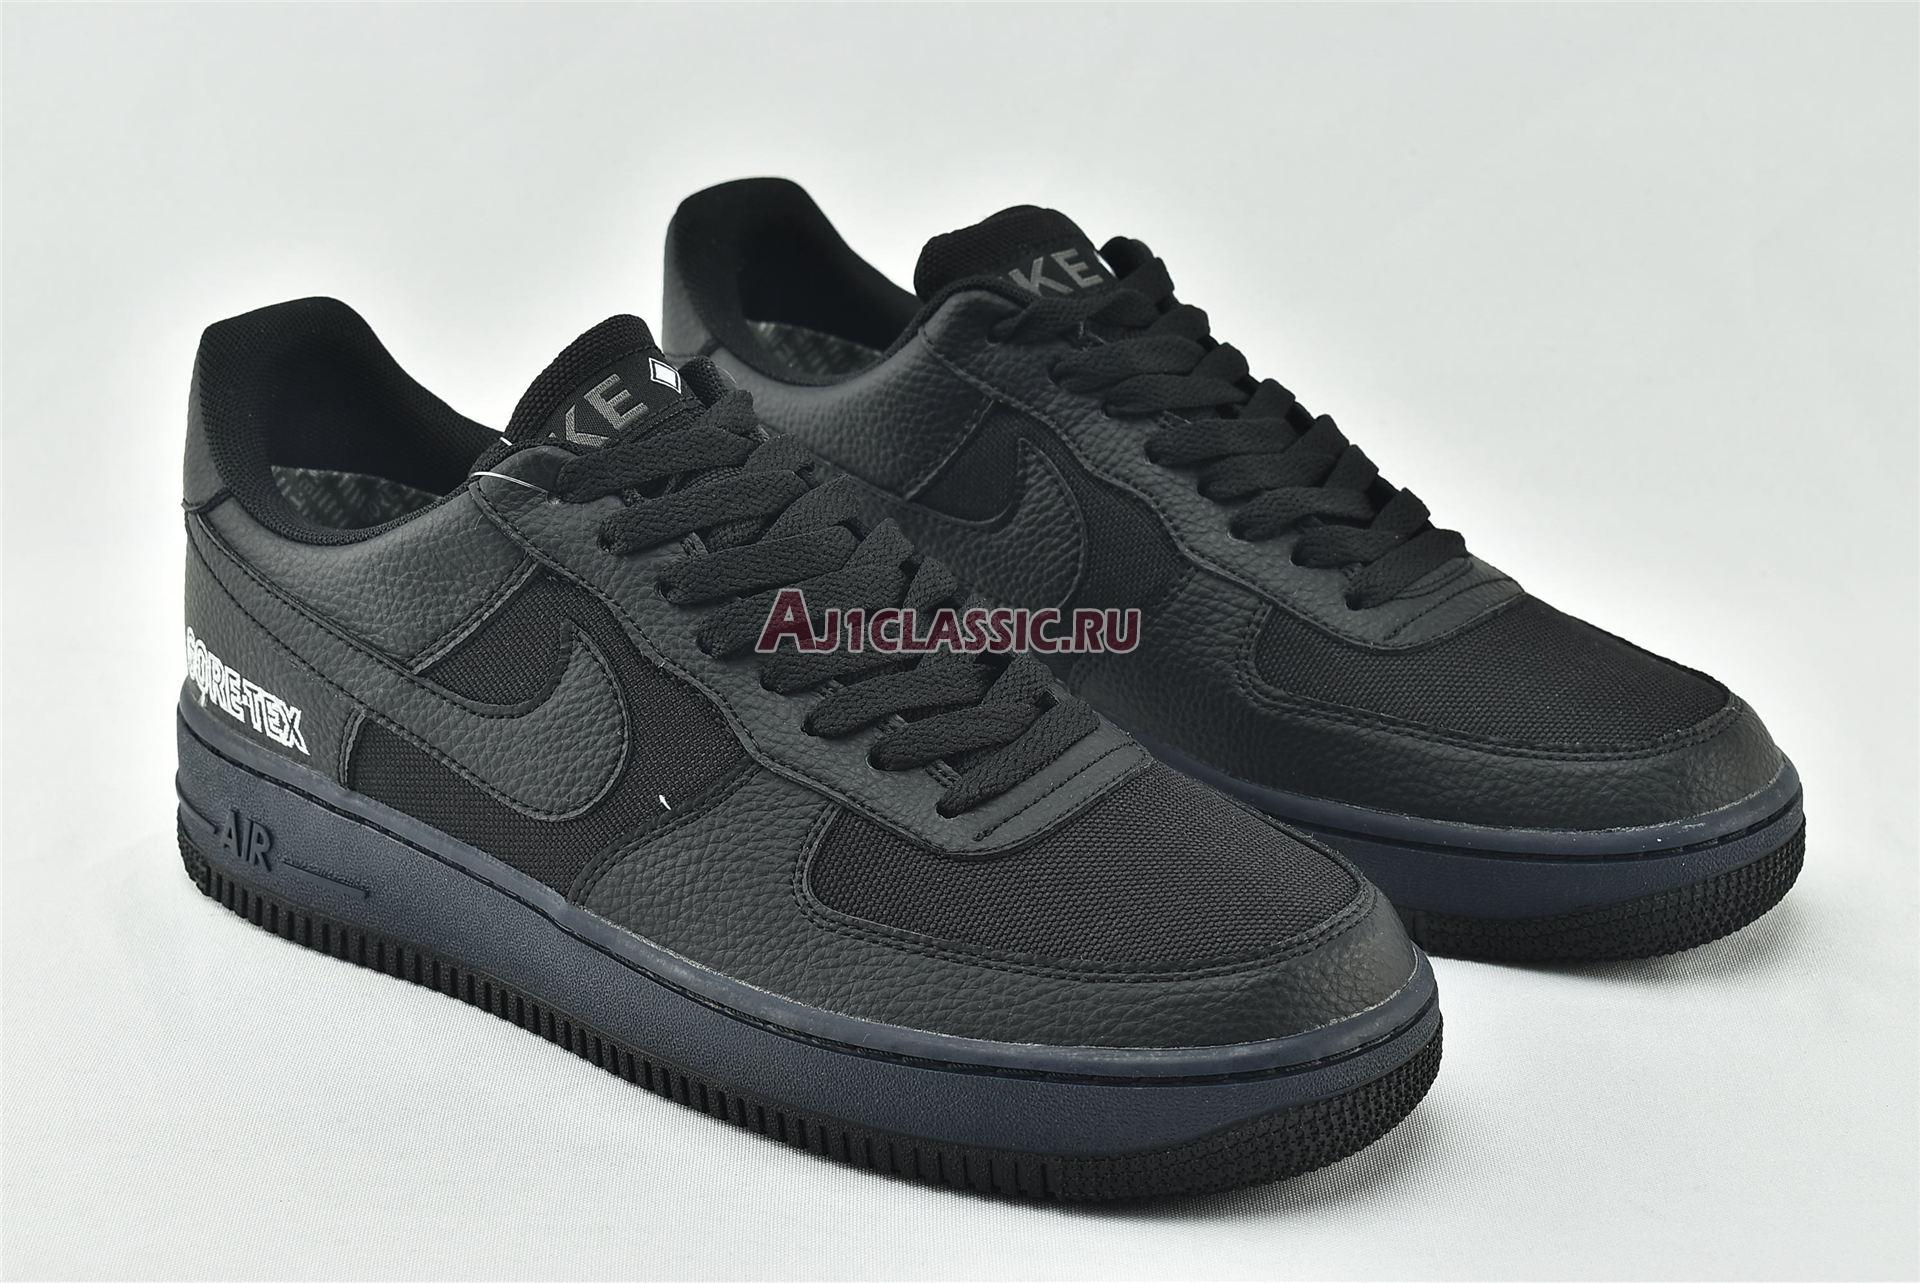 Nike Air Force 1 GTX Anthracite Grey CT2858-001 Anthracite/Black-Barely